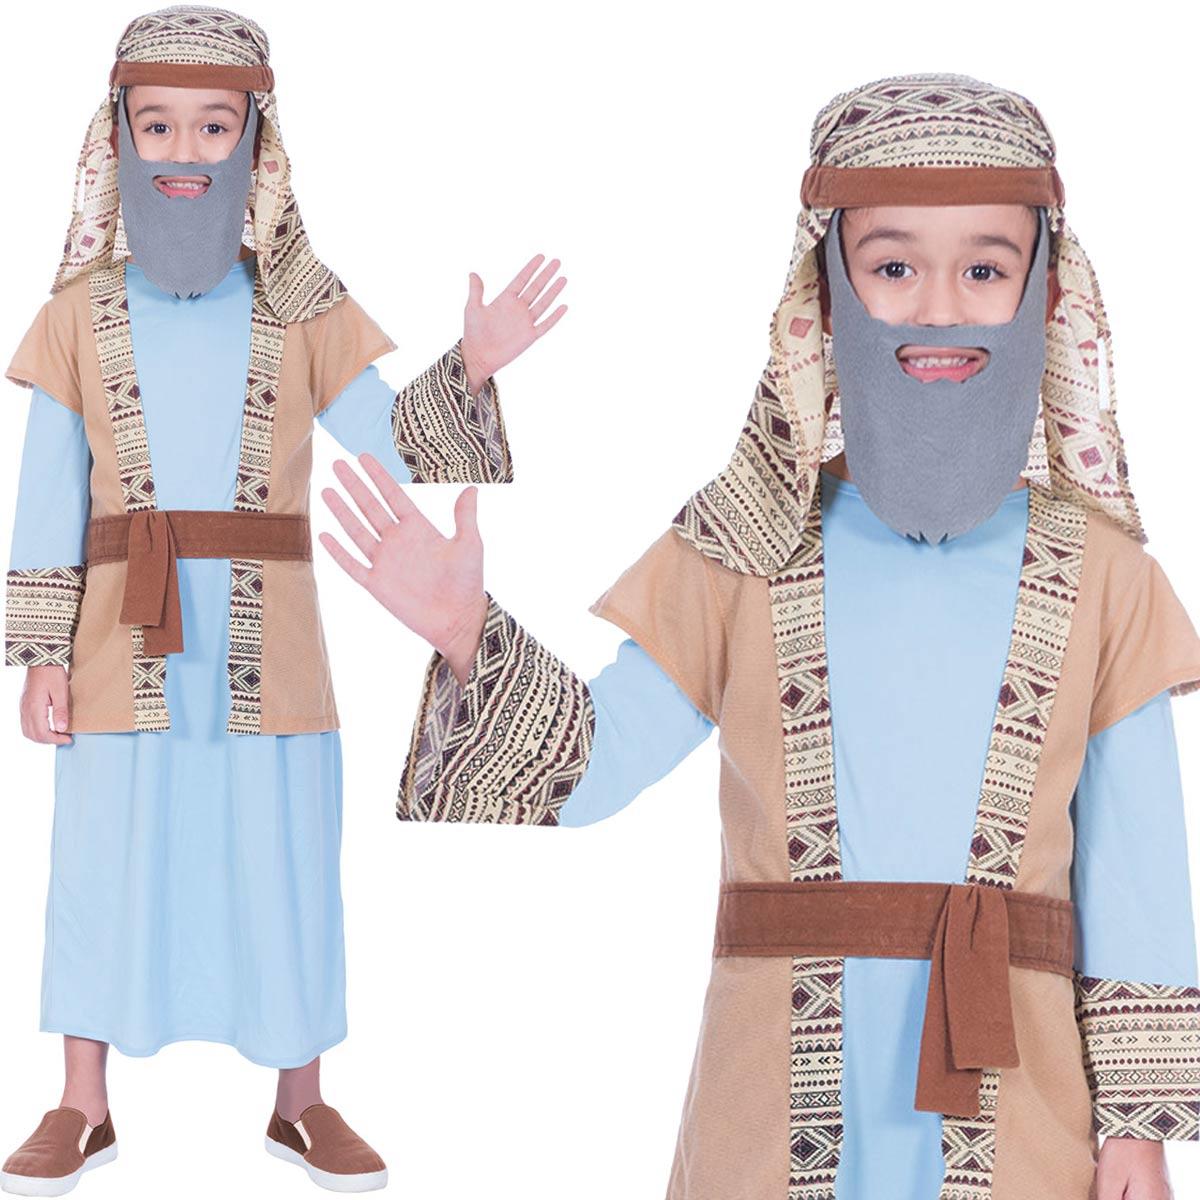 Kid's Nativity Shepherd fancy dress by Amscan 9904064 / 9904076 in sizes small and medium available here at Karnival Costumes online Christmas party shop